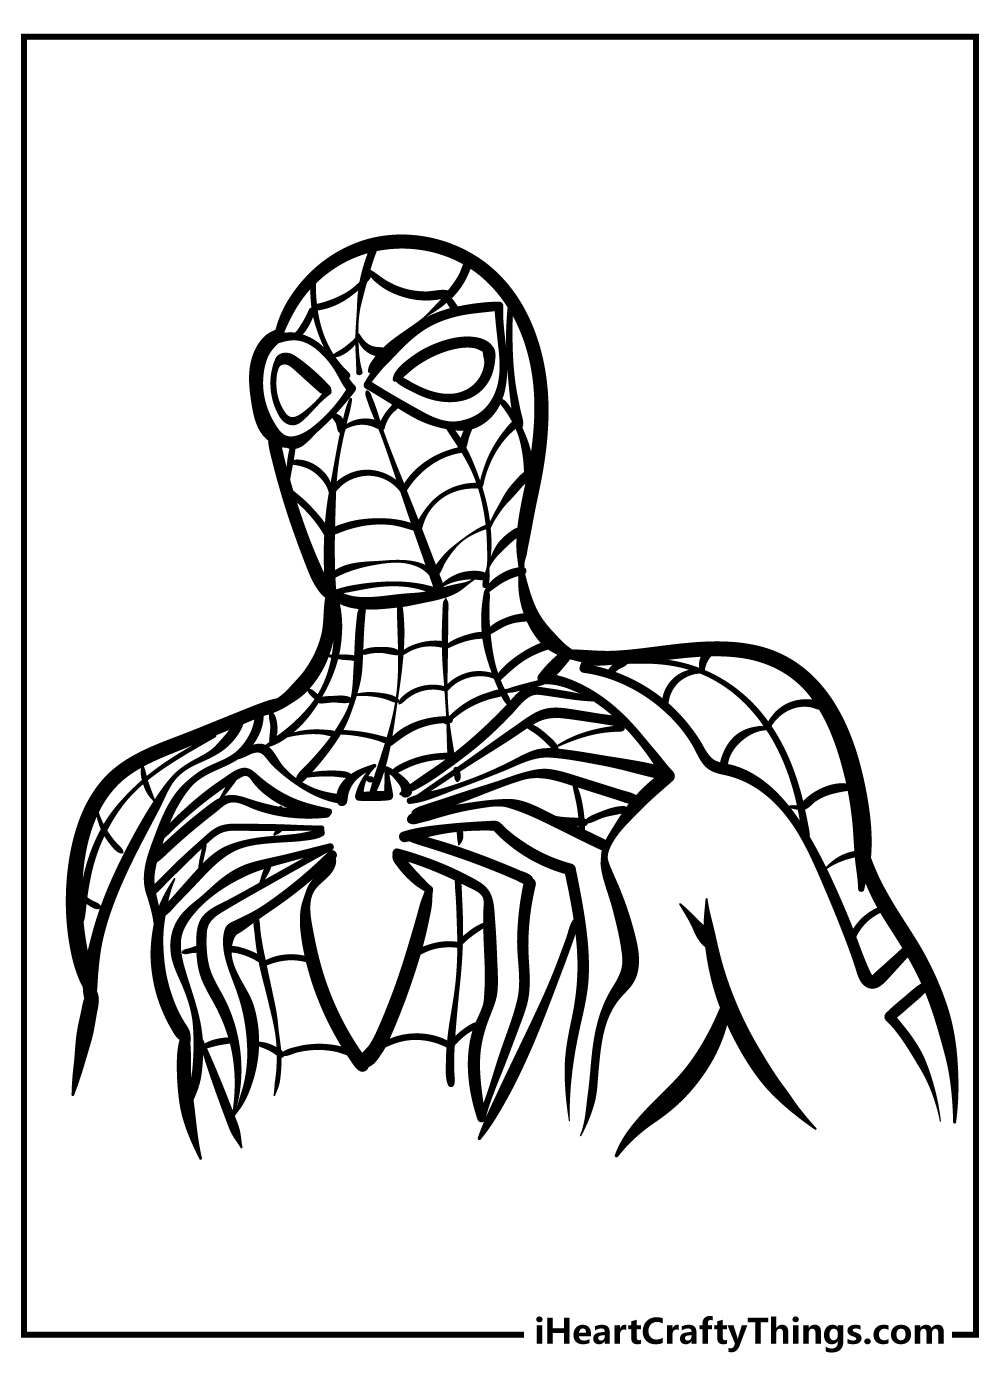 Printable Spider-Man Coloring Pages (Updated 2023)